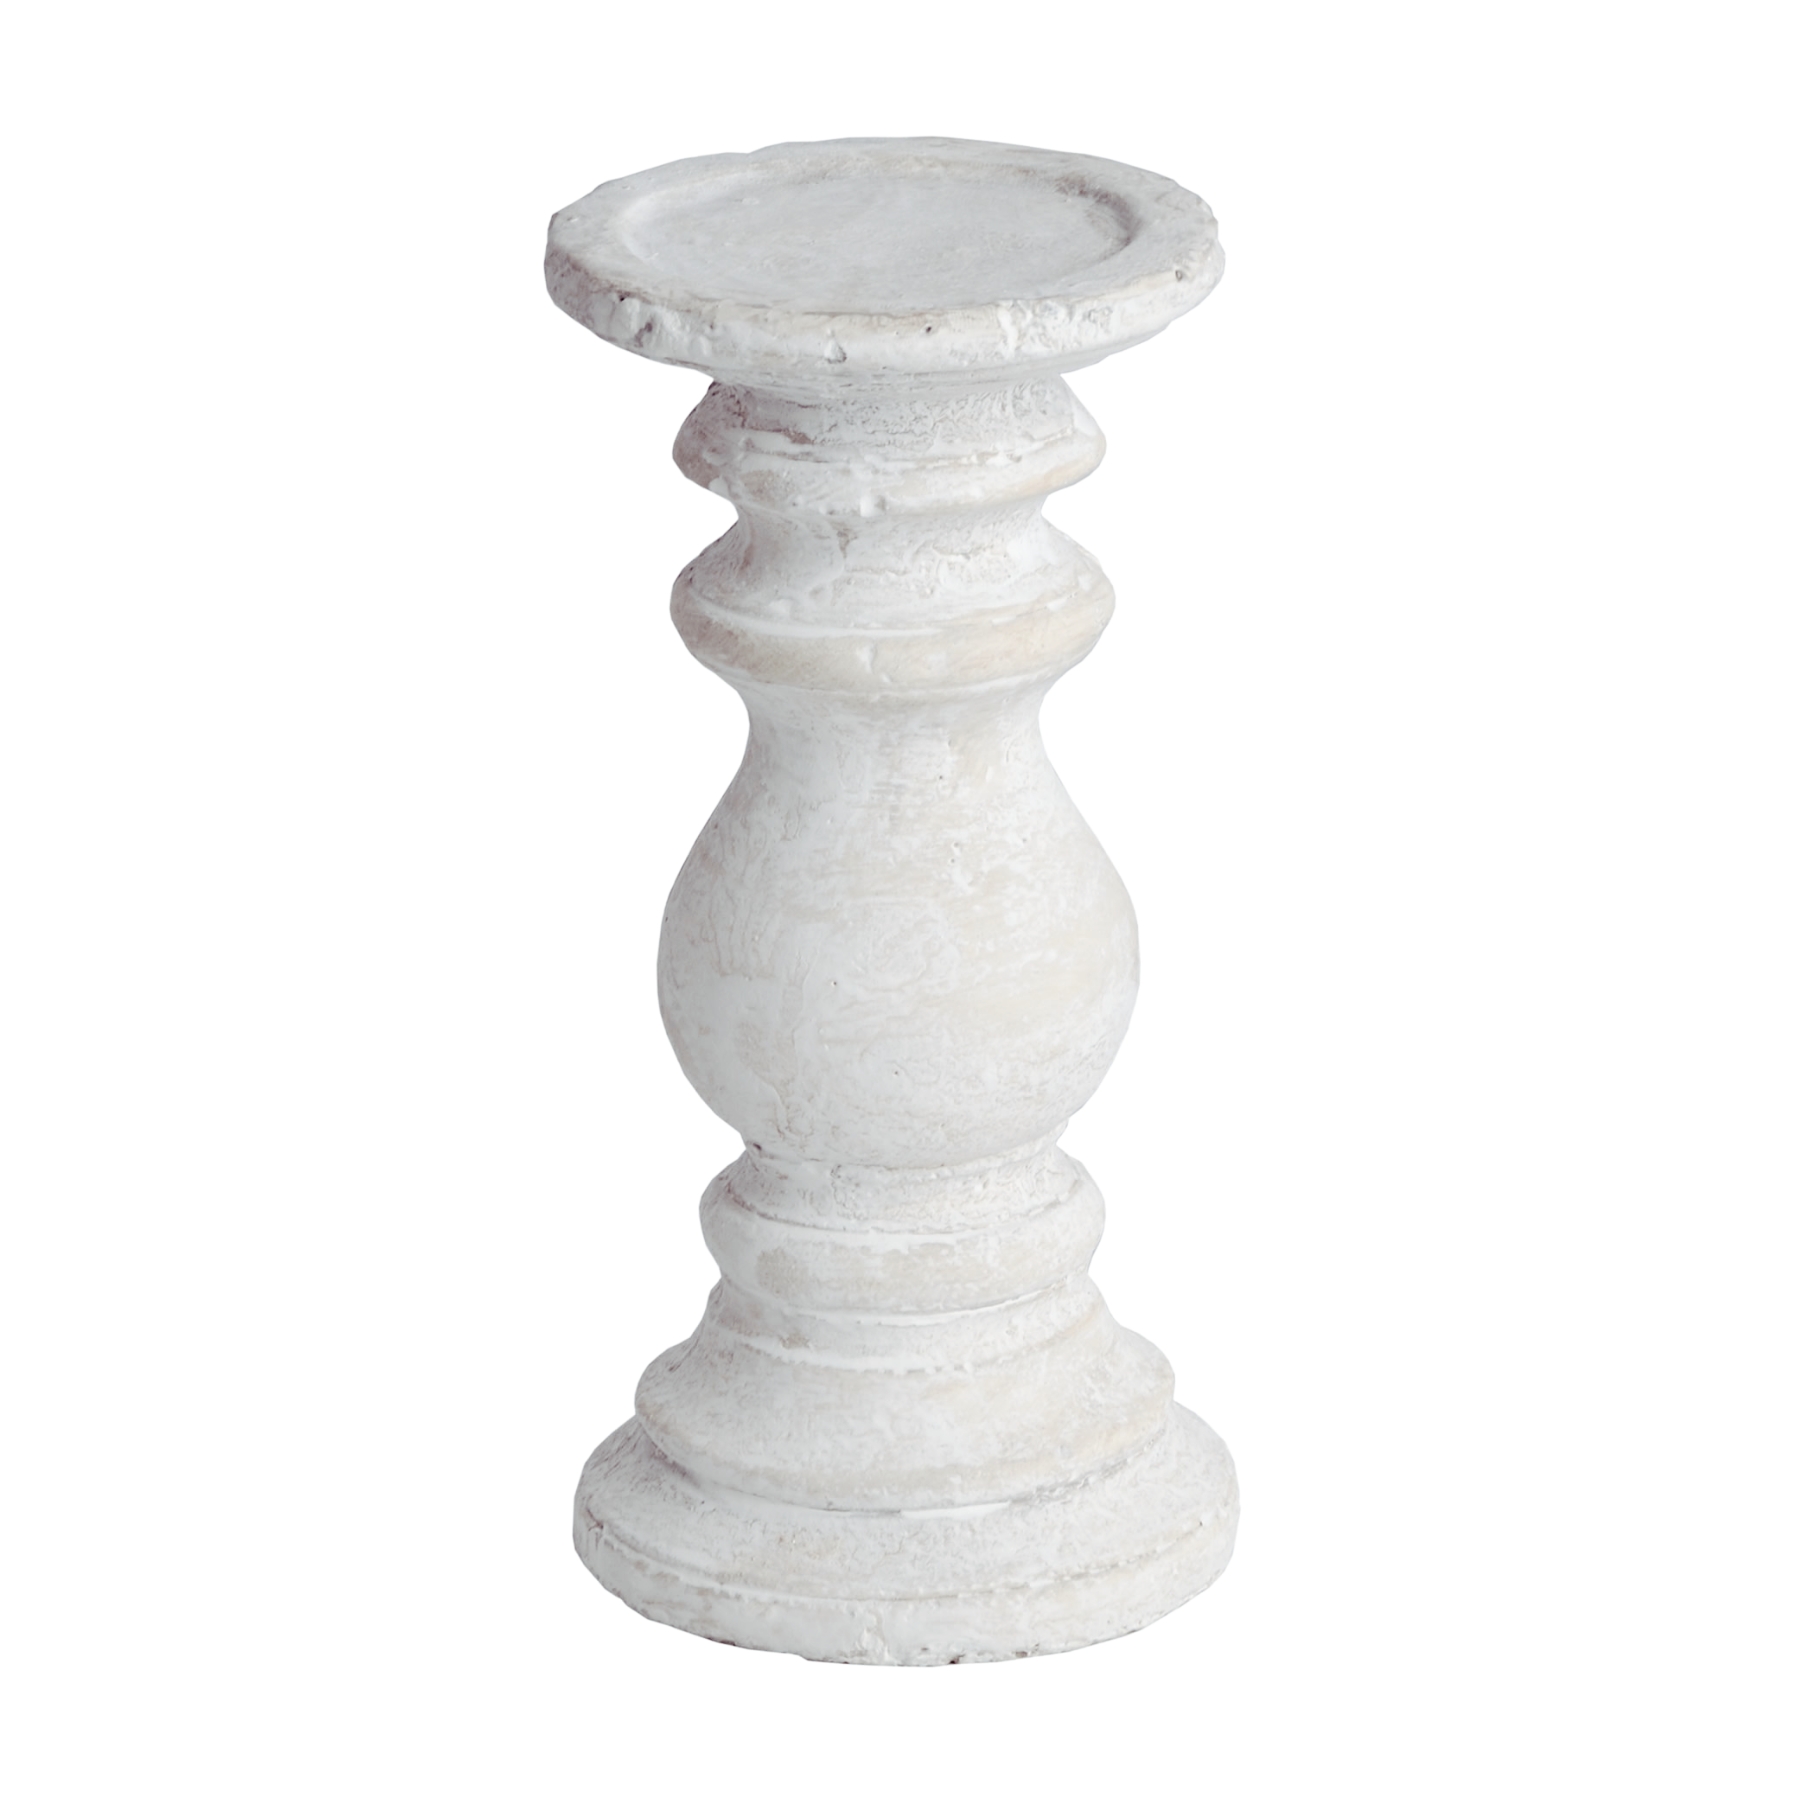 Small Stone Candle Holder - Image 1